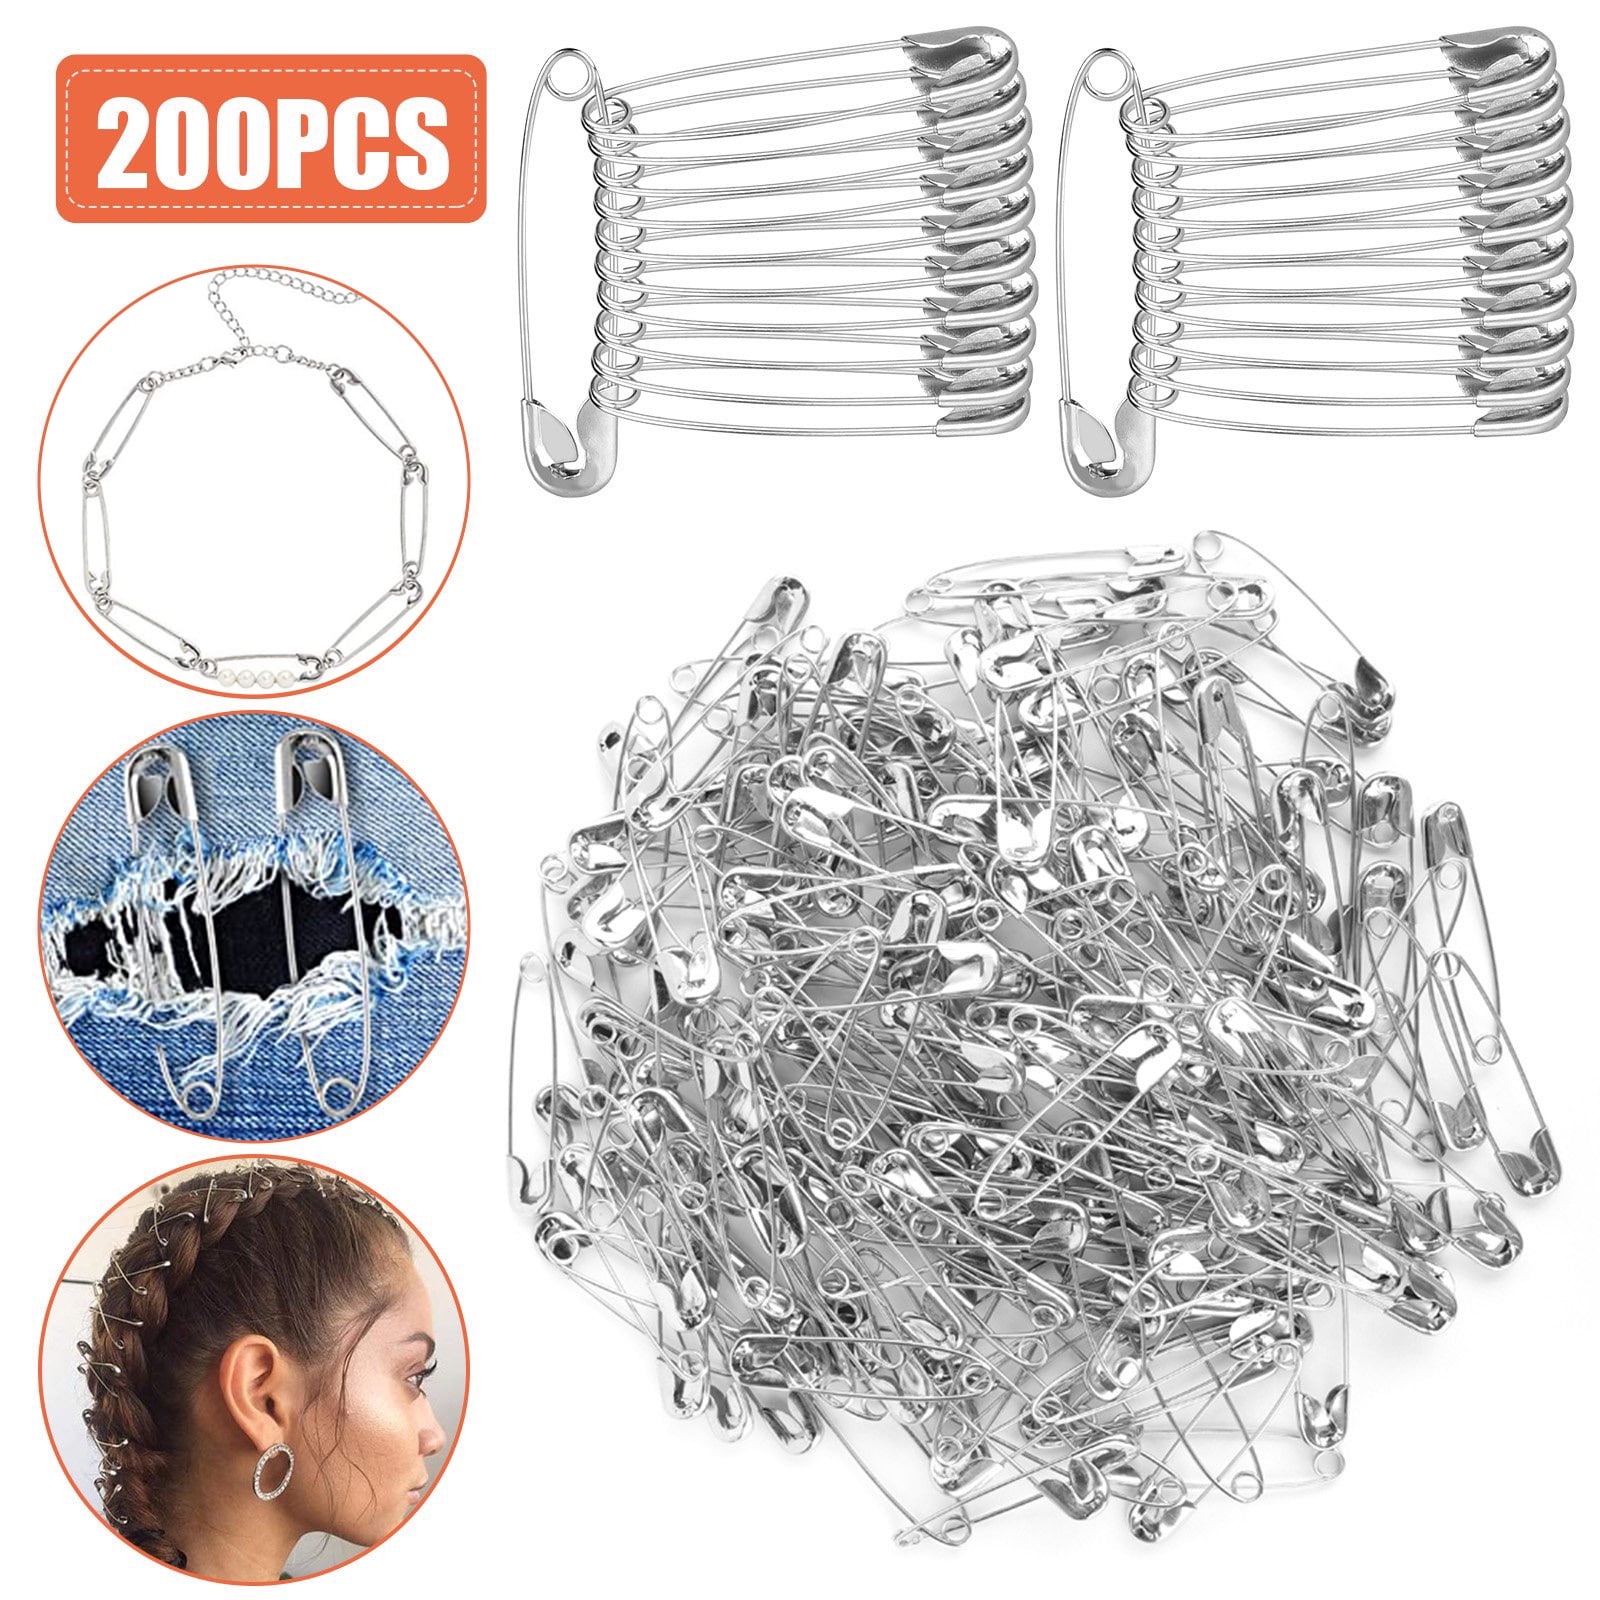 Safety Pins, Safety Pins Assorted, 500 Pack, Assorted Safety Pins, Safety  Pin, Small Safety Pins, Safety Pins Bulk, Large Safety Pins, Safety Pins  for Clothes 